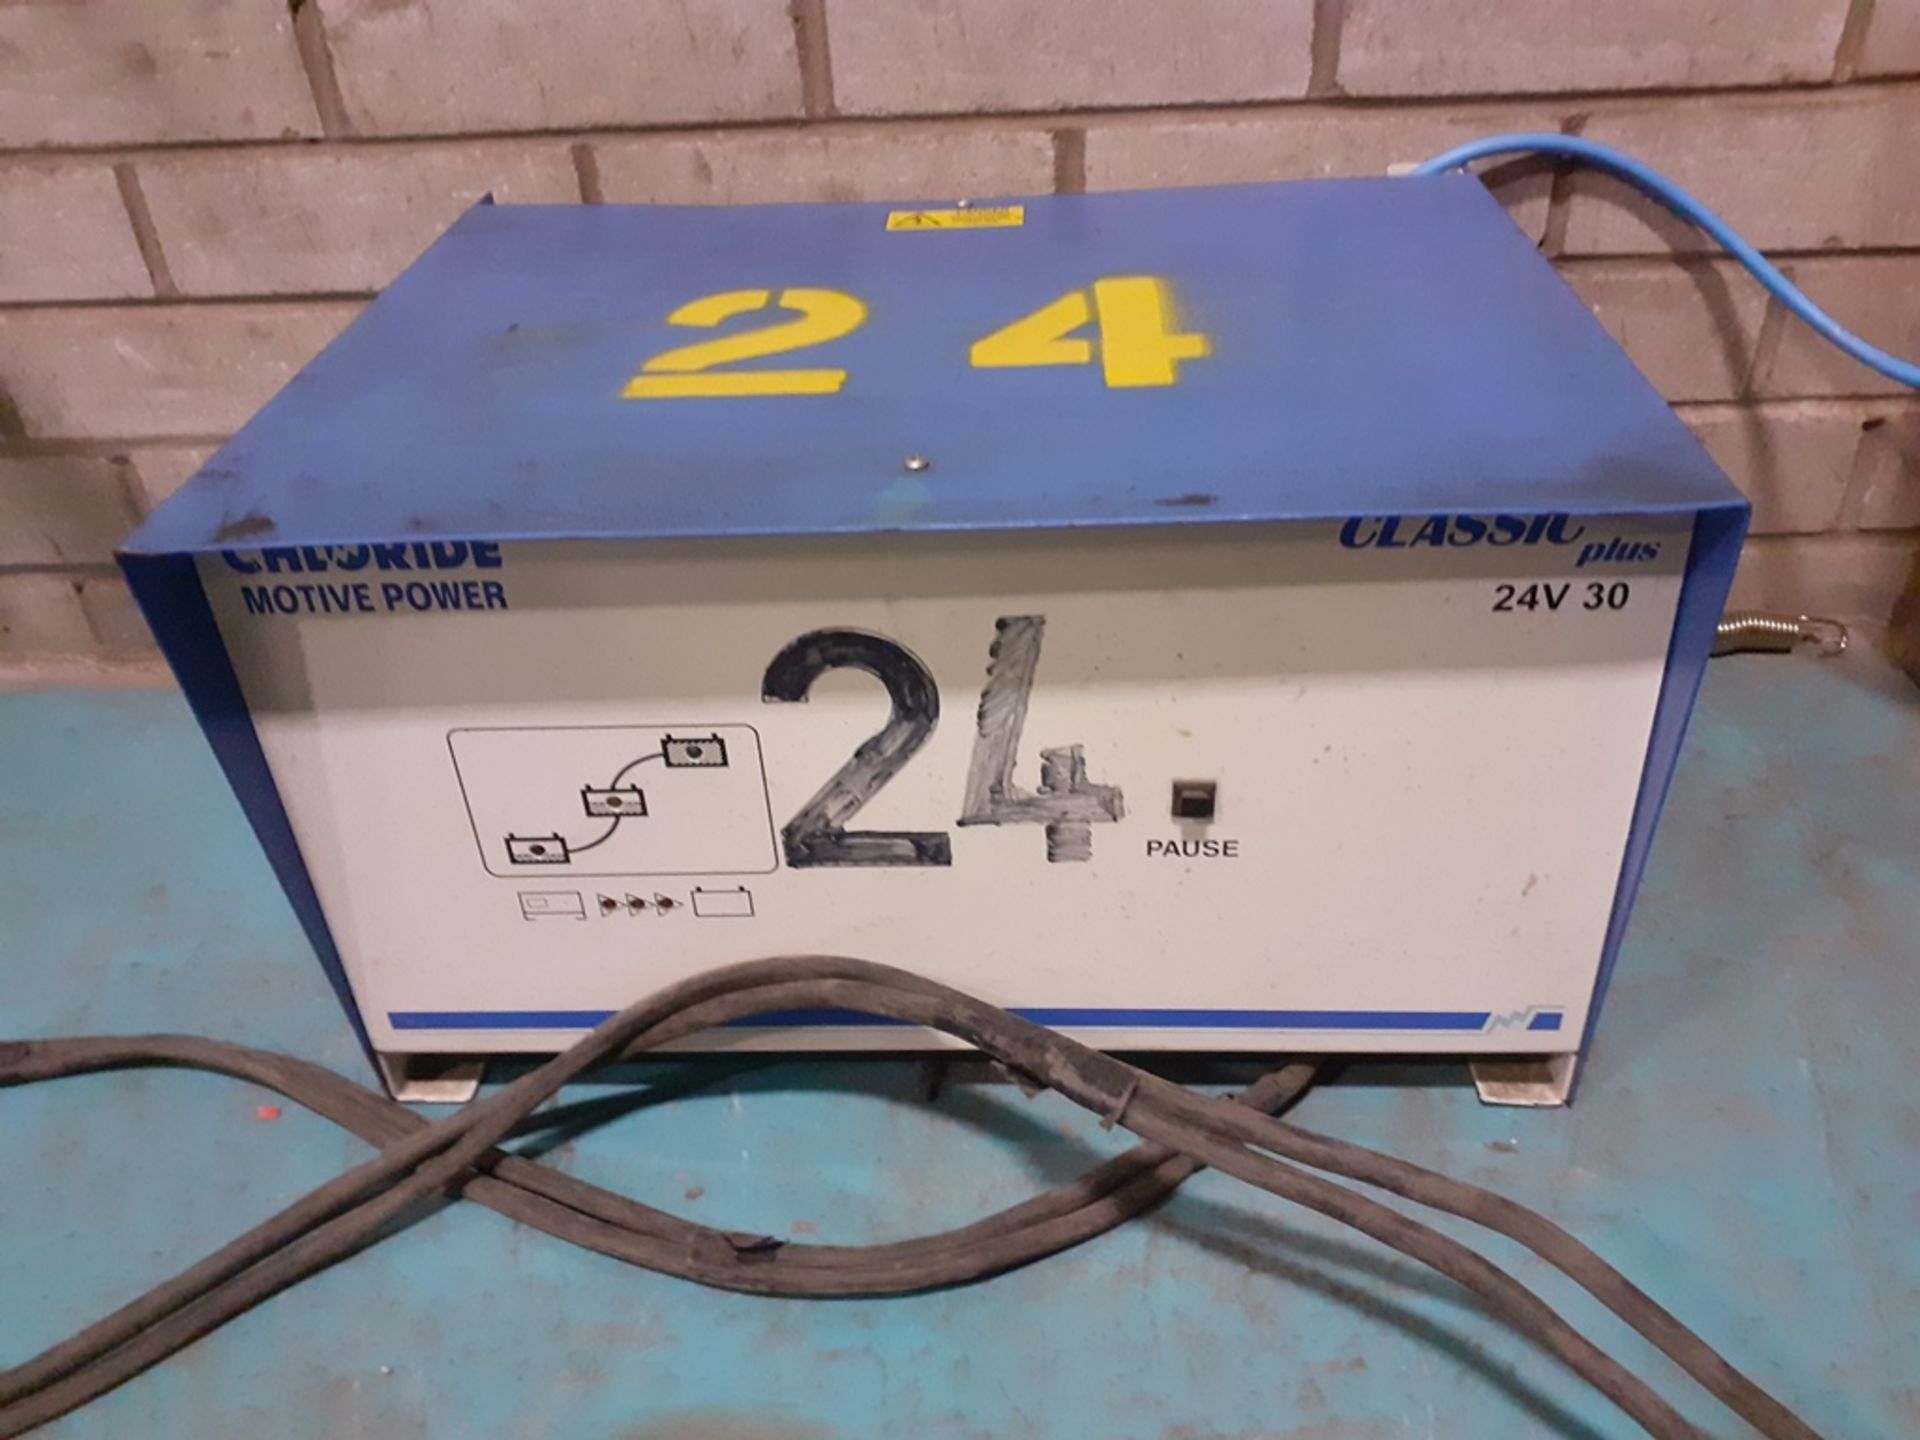 Jungheinrich EJE 22 electric pallet truck, s/n 80326775, with Chloride 24 charger, s/n AB 00930236. - Image 3 of 5